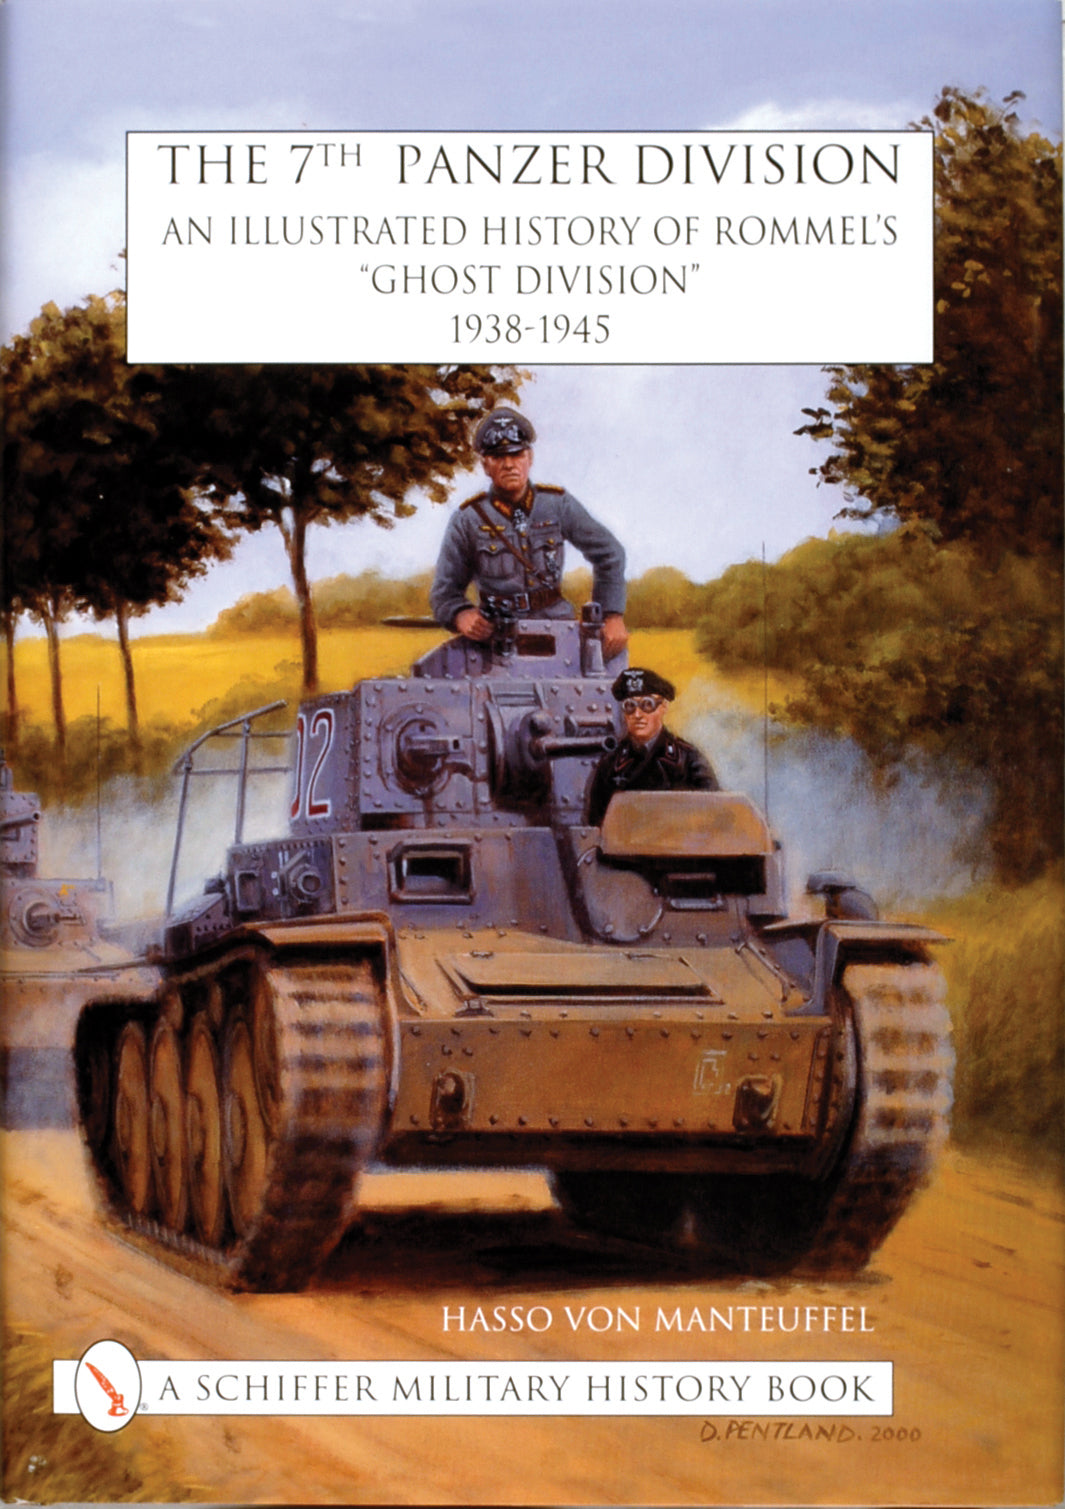 The 7th Panzer Division